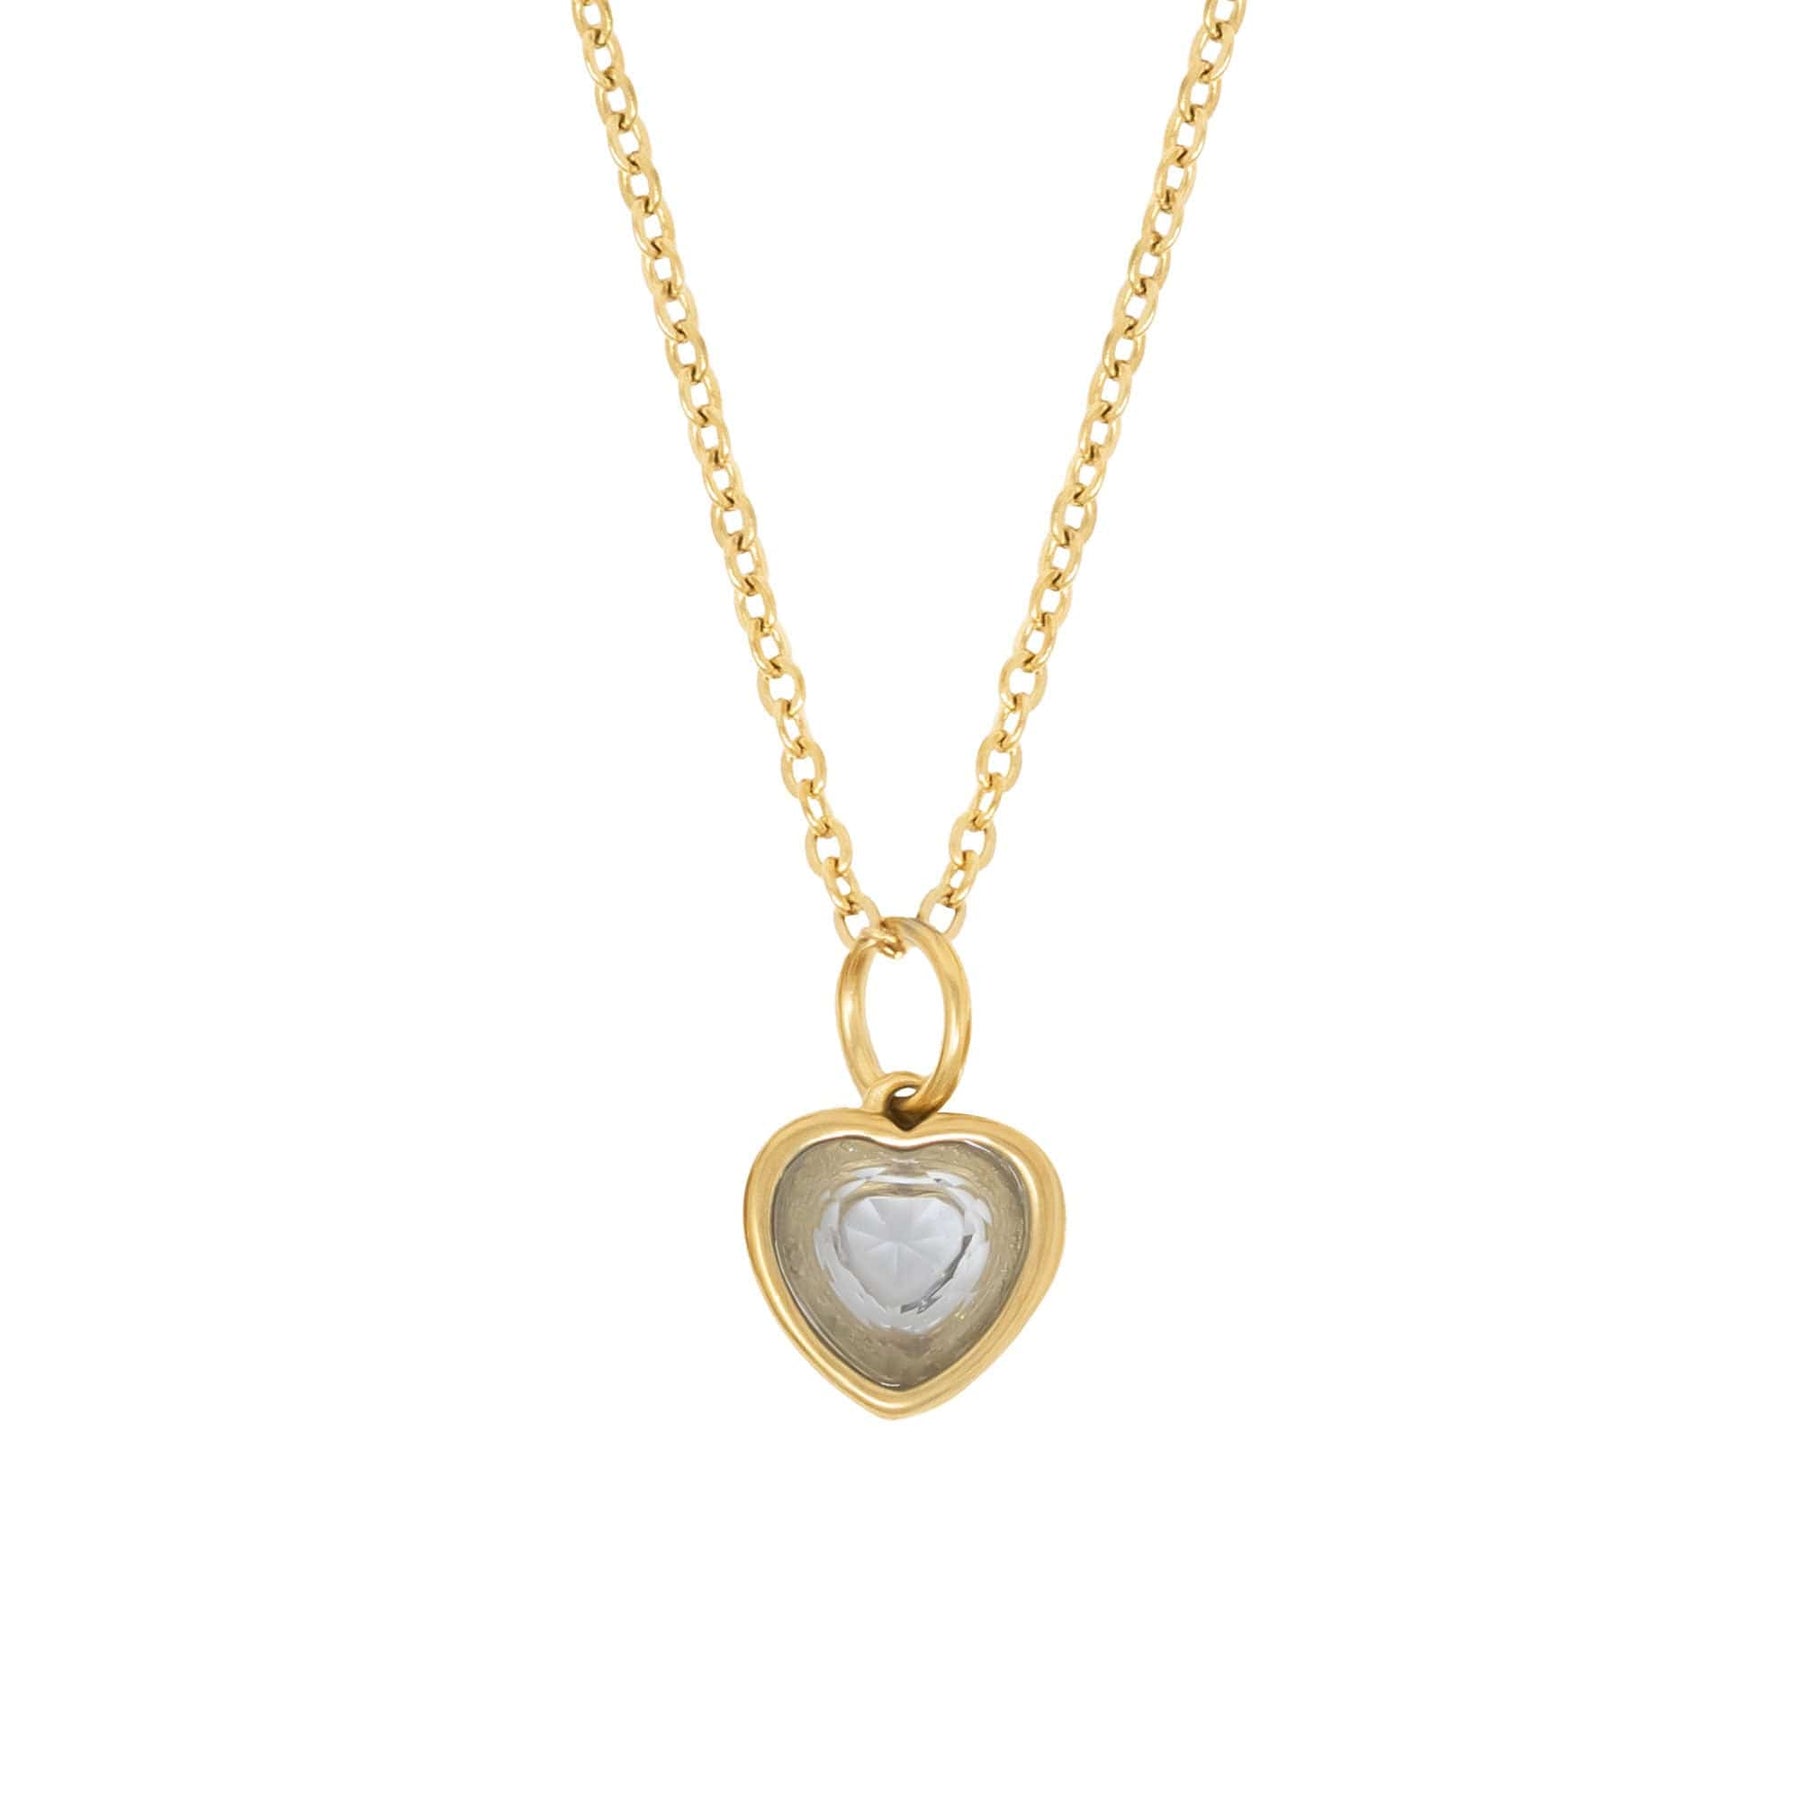 BohoMoon Stainless Steel Love Heart Birthstone Necklace Gold / March